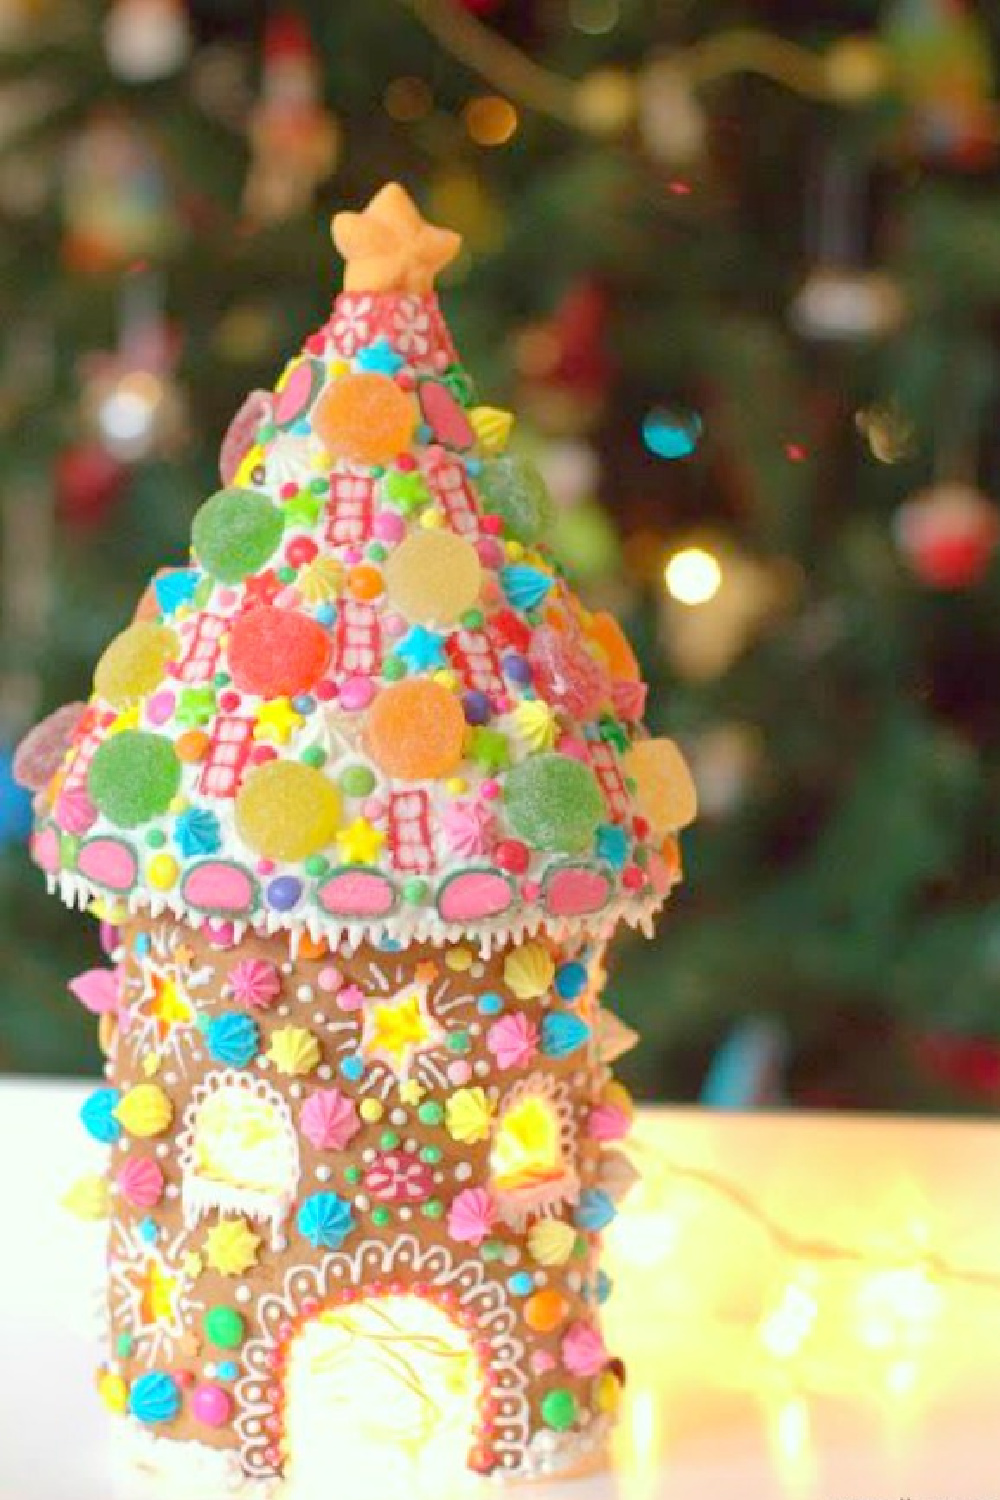 Magical and darling, this candy house turret has been decorated whimsically with colorful candies - Lizon. #gingerbreadhouse #holidaybaking